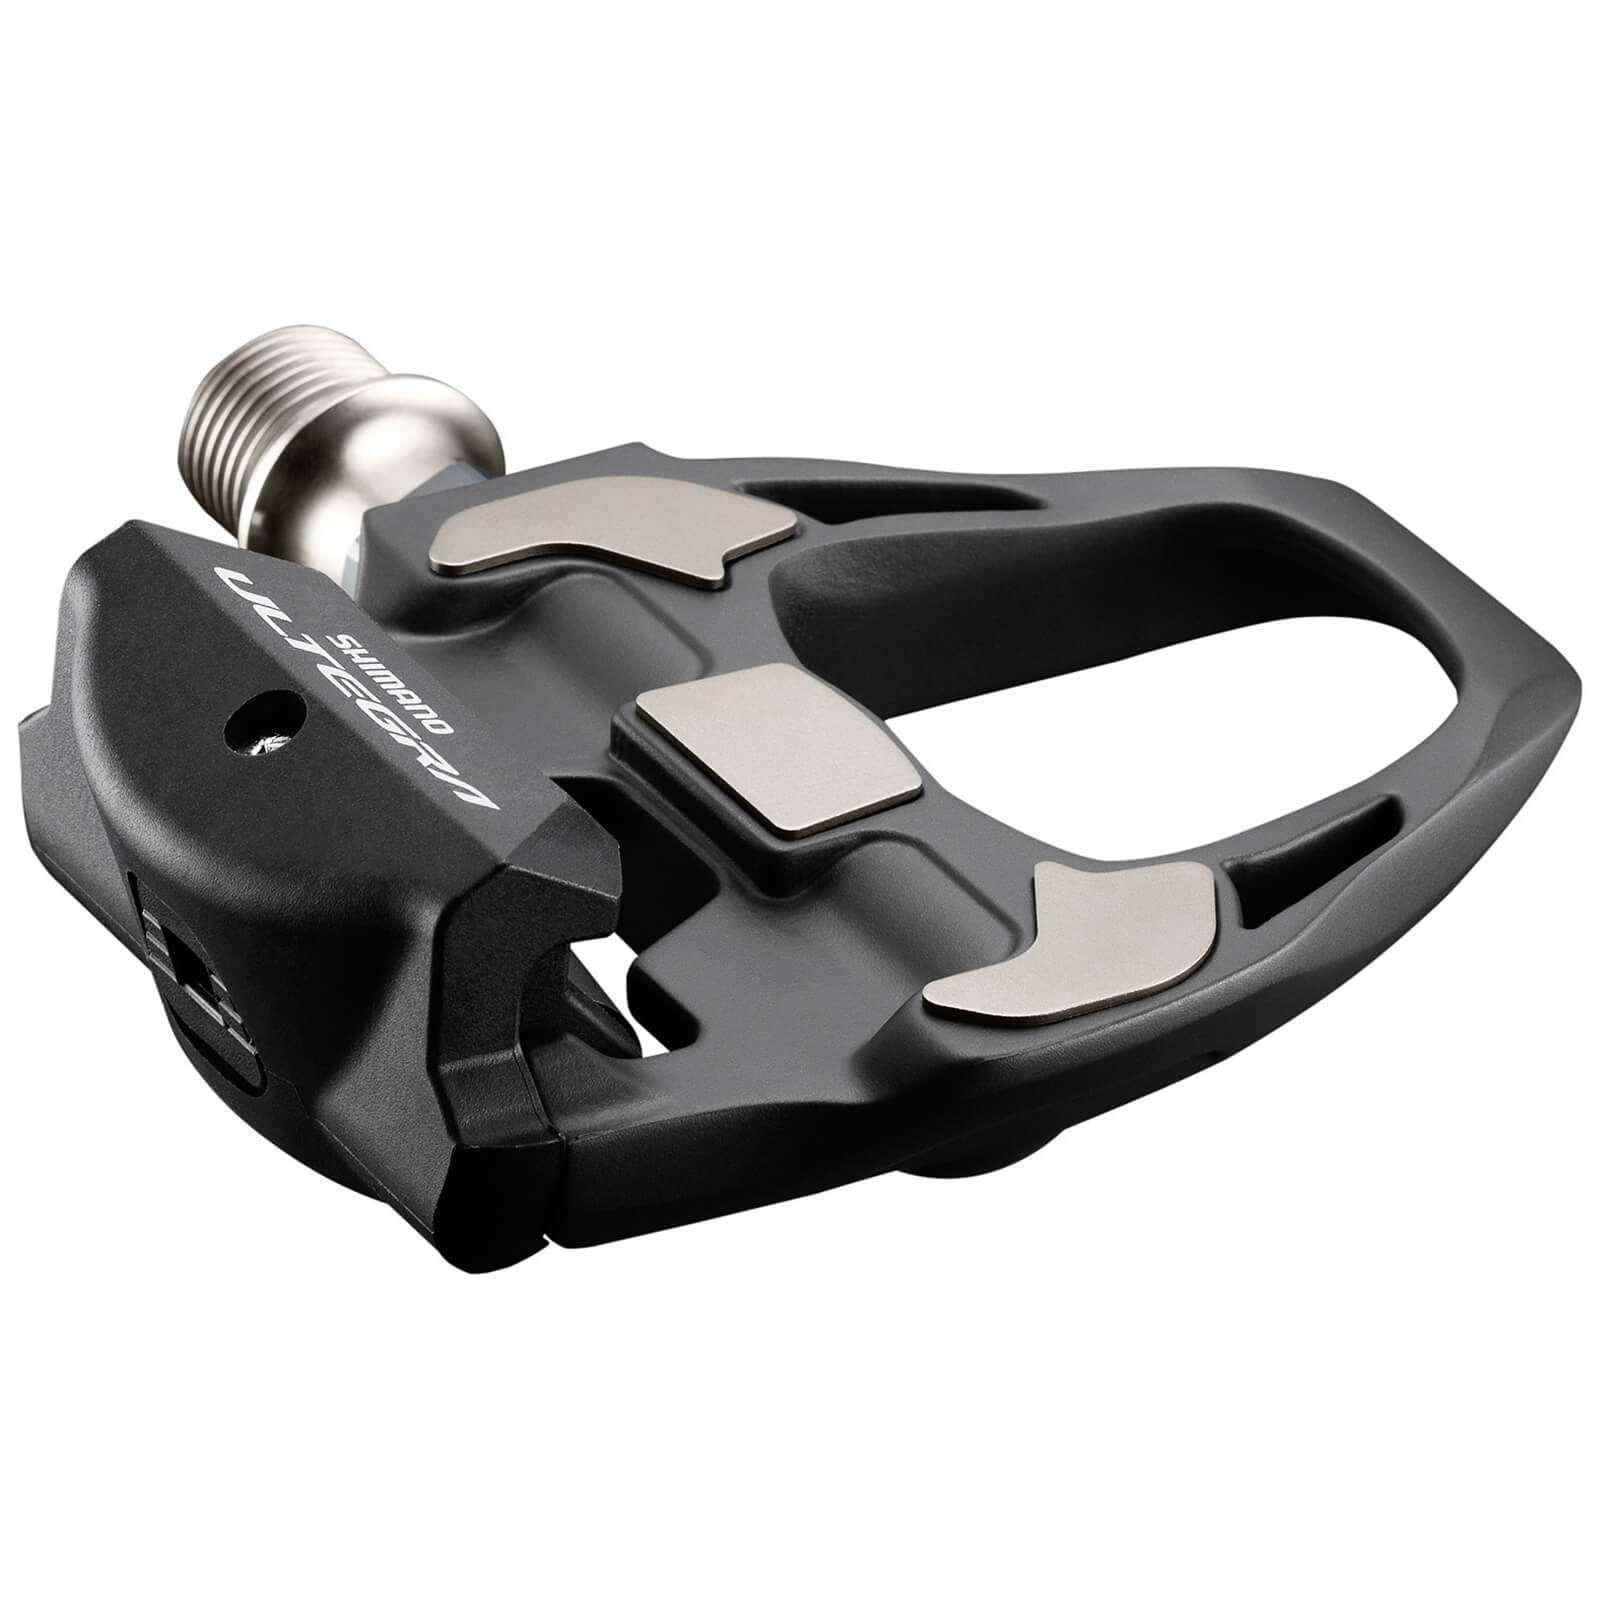 Image of Shimano PD-R8000 Ultegra SPD-SL Carbon Road Bike Pedals in Black | Rutland Cycling